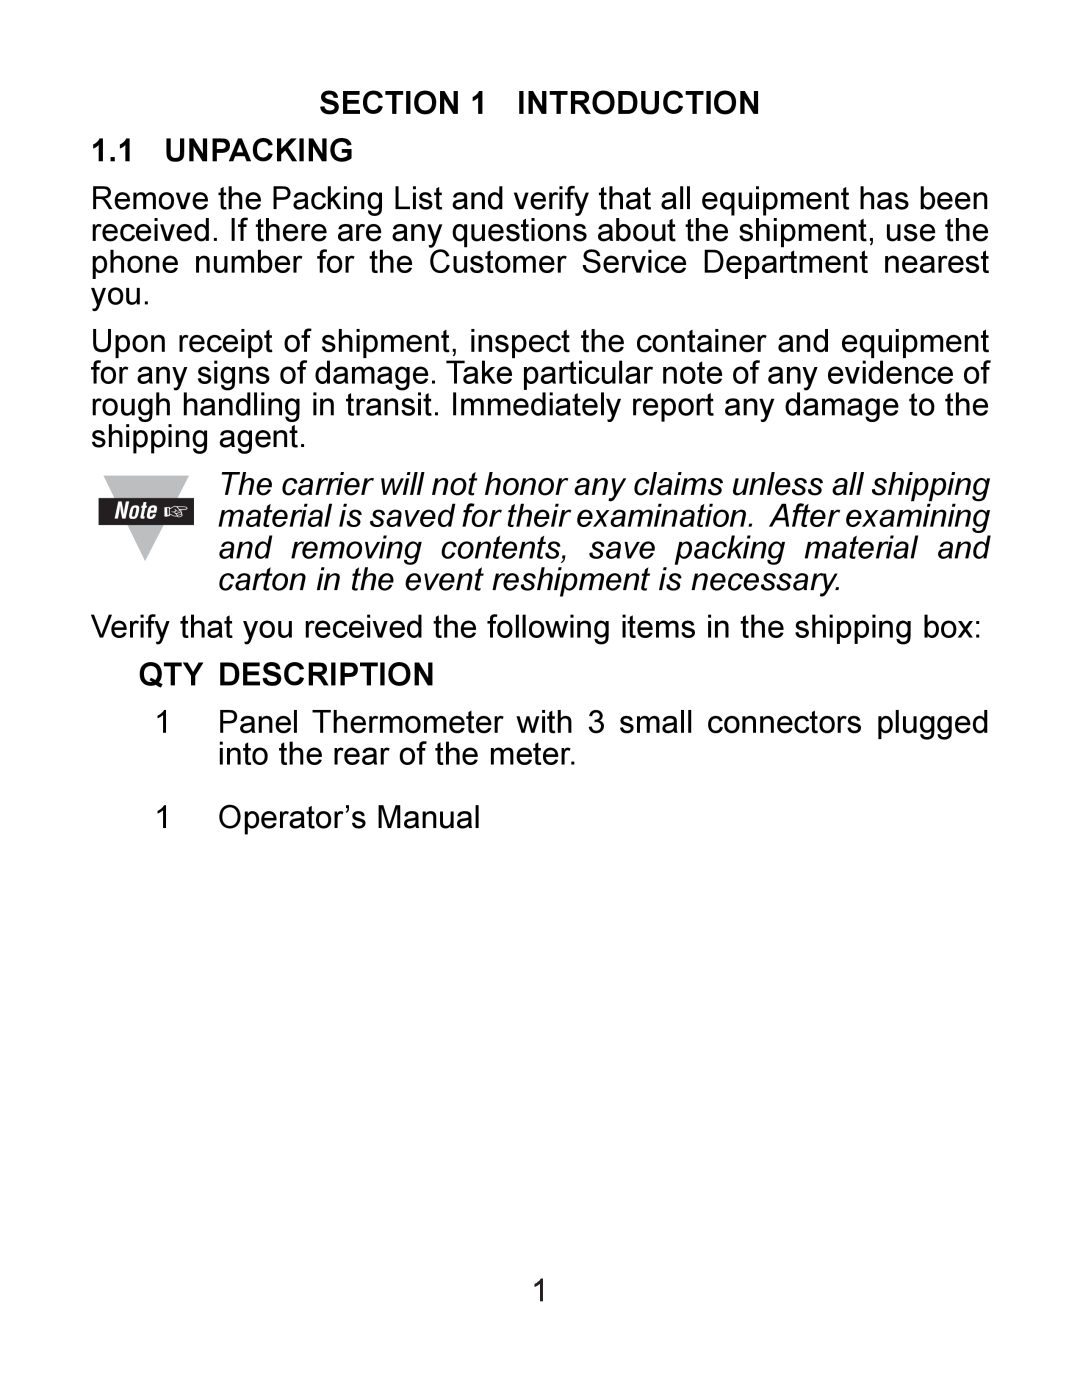 Omega DP119-RTD manual INTRODUCTION 1.1 UNPACKING, Qty Description, carton in the event reshipment is necessary 